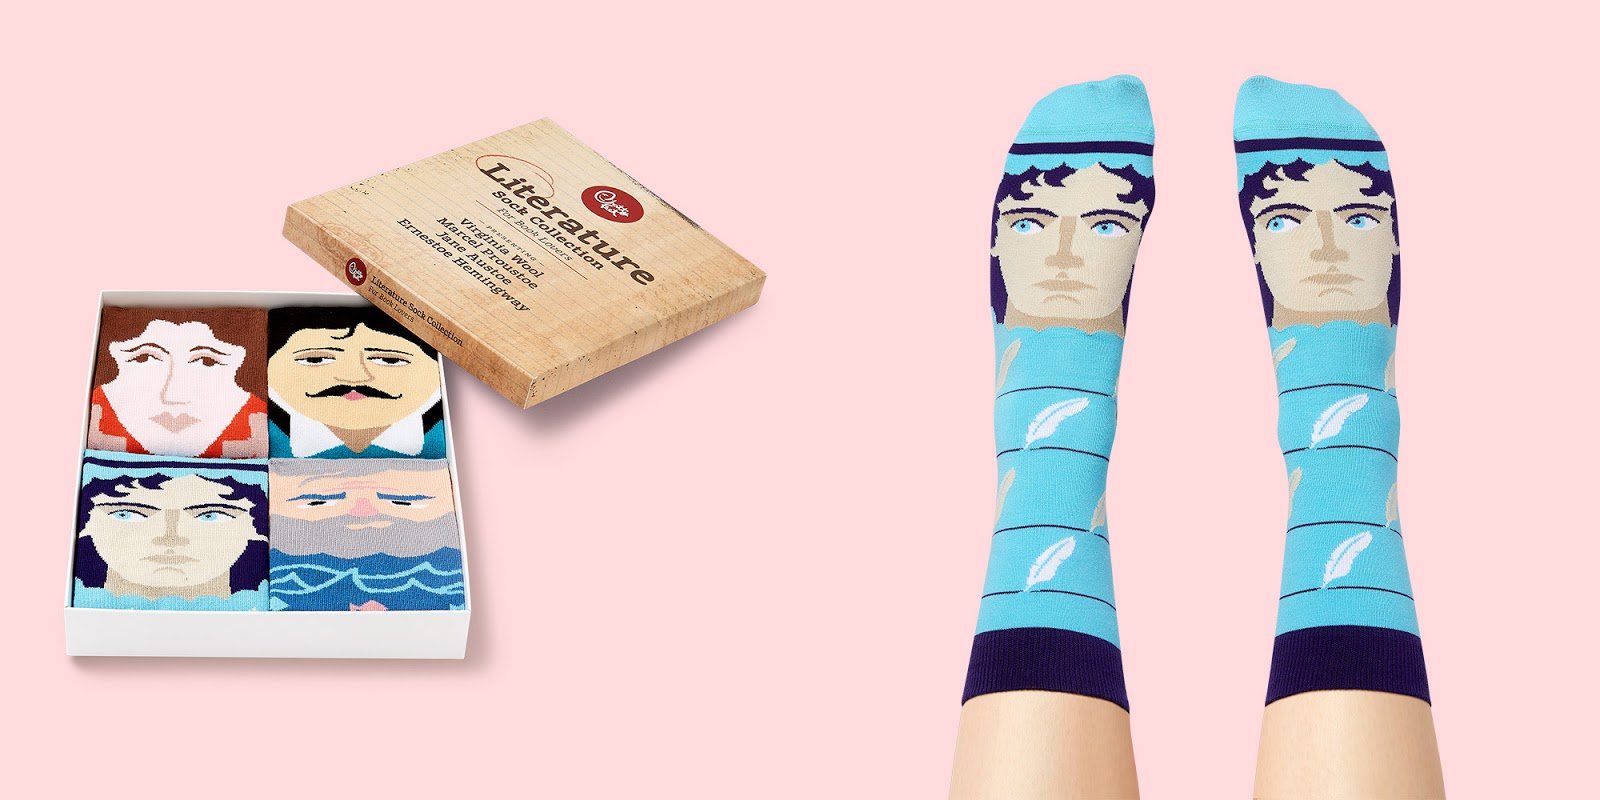 on-starting-a-character-socks-business-with-50-products-design